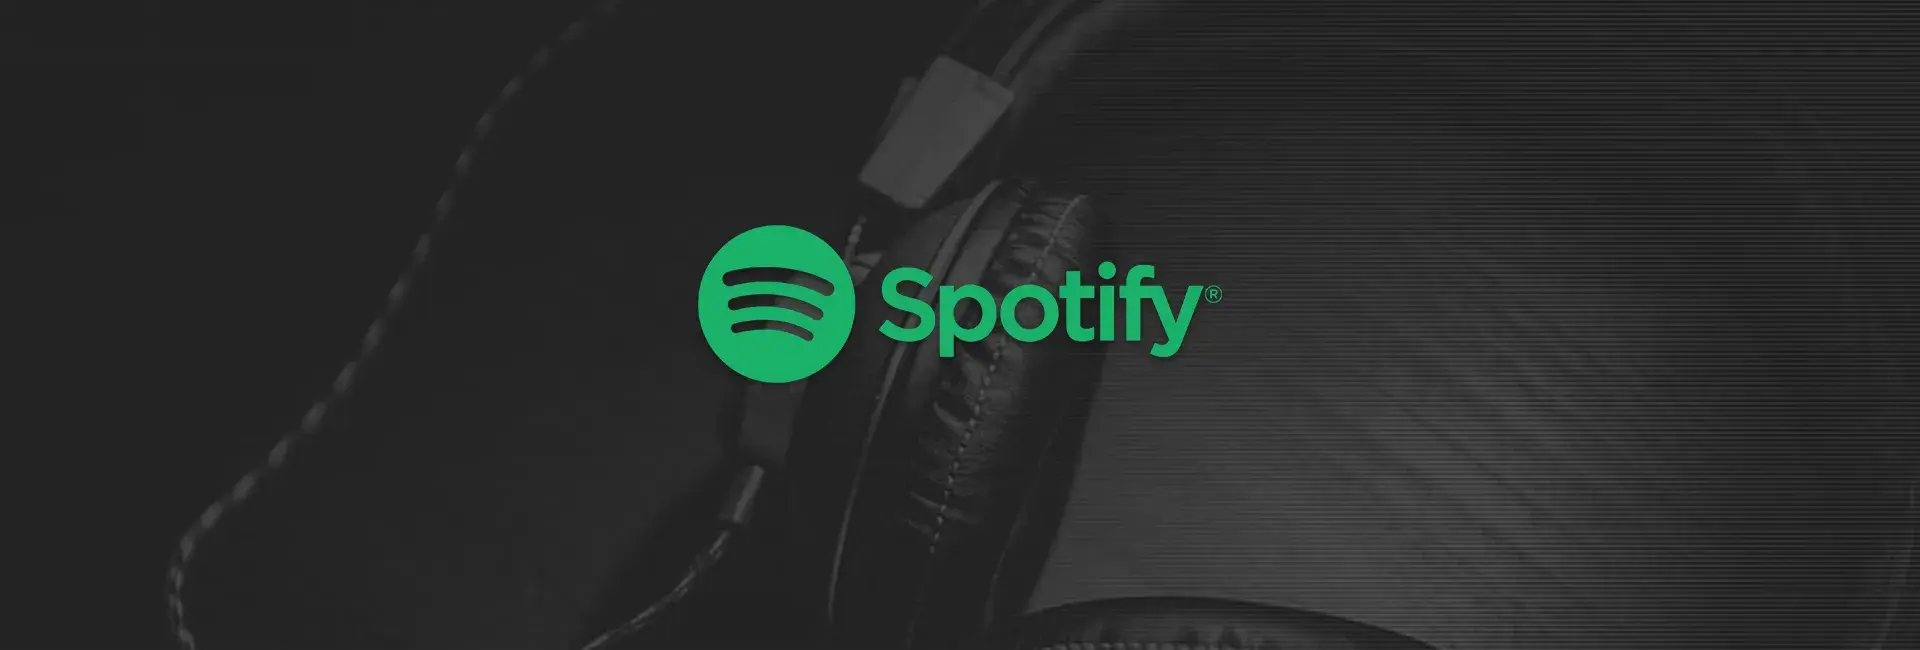 Spotify Gift Card Egypt - 6 Month Premium